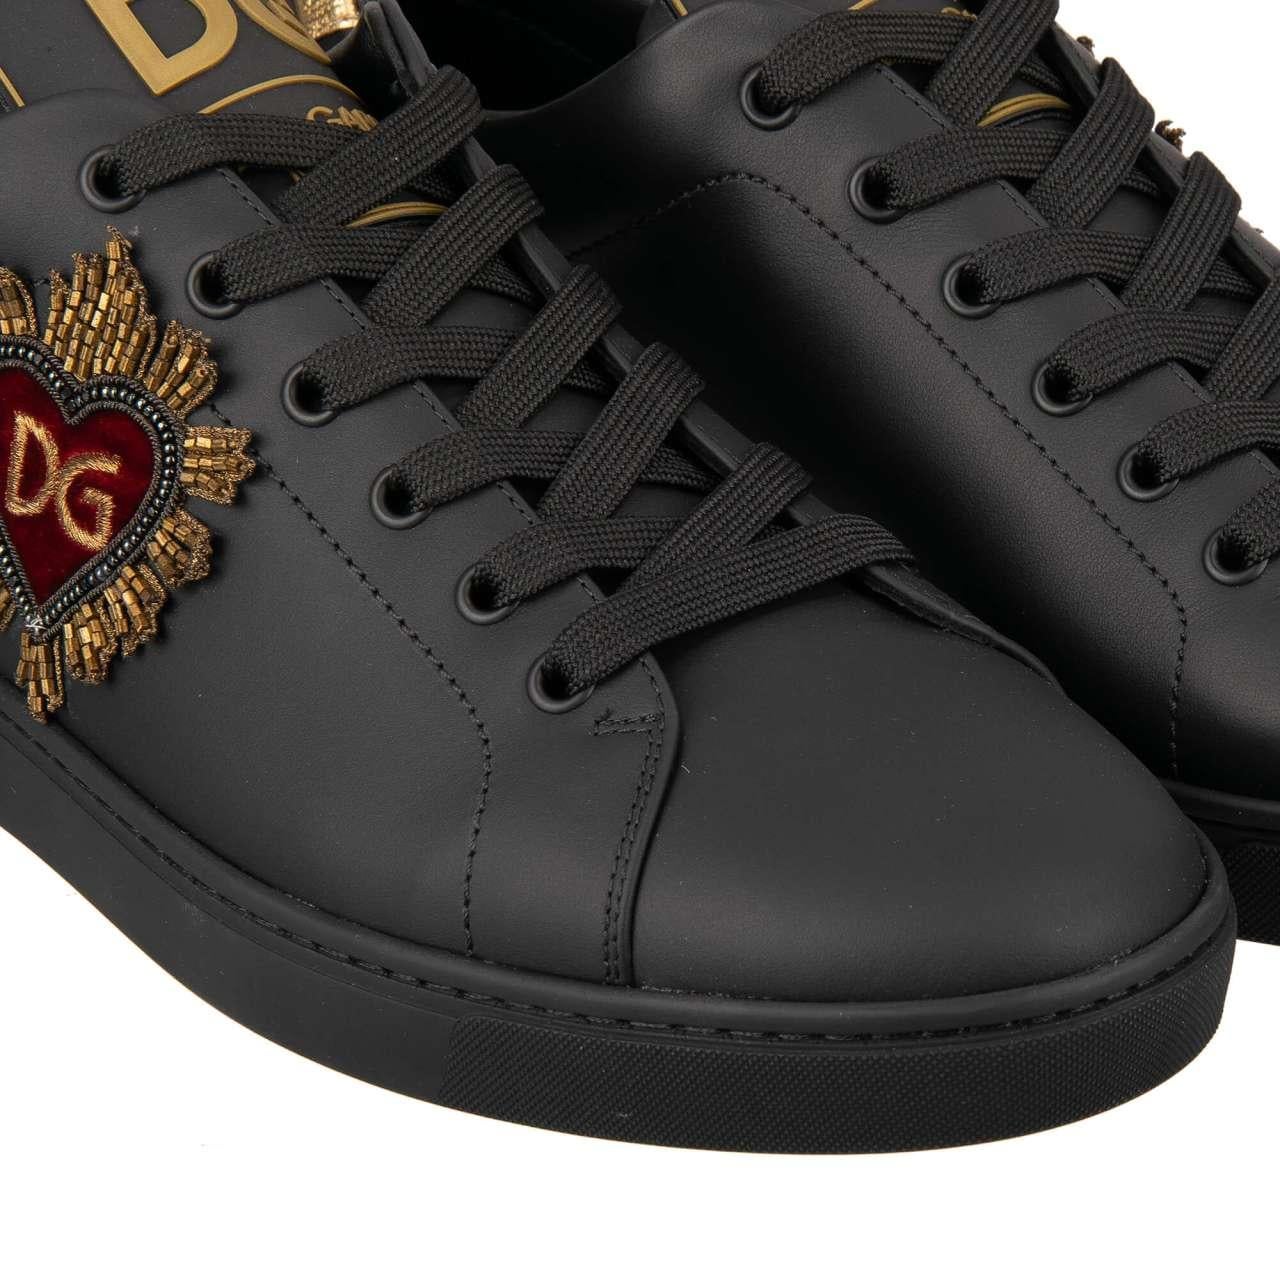 D&G - Low-Top Sneaker LONDON with Logo Heart Embroidery Black Gold EUR 43.5 For Sale 2